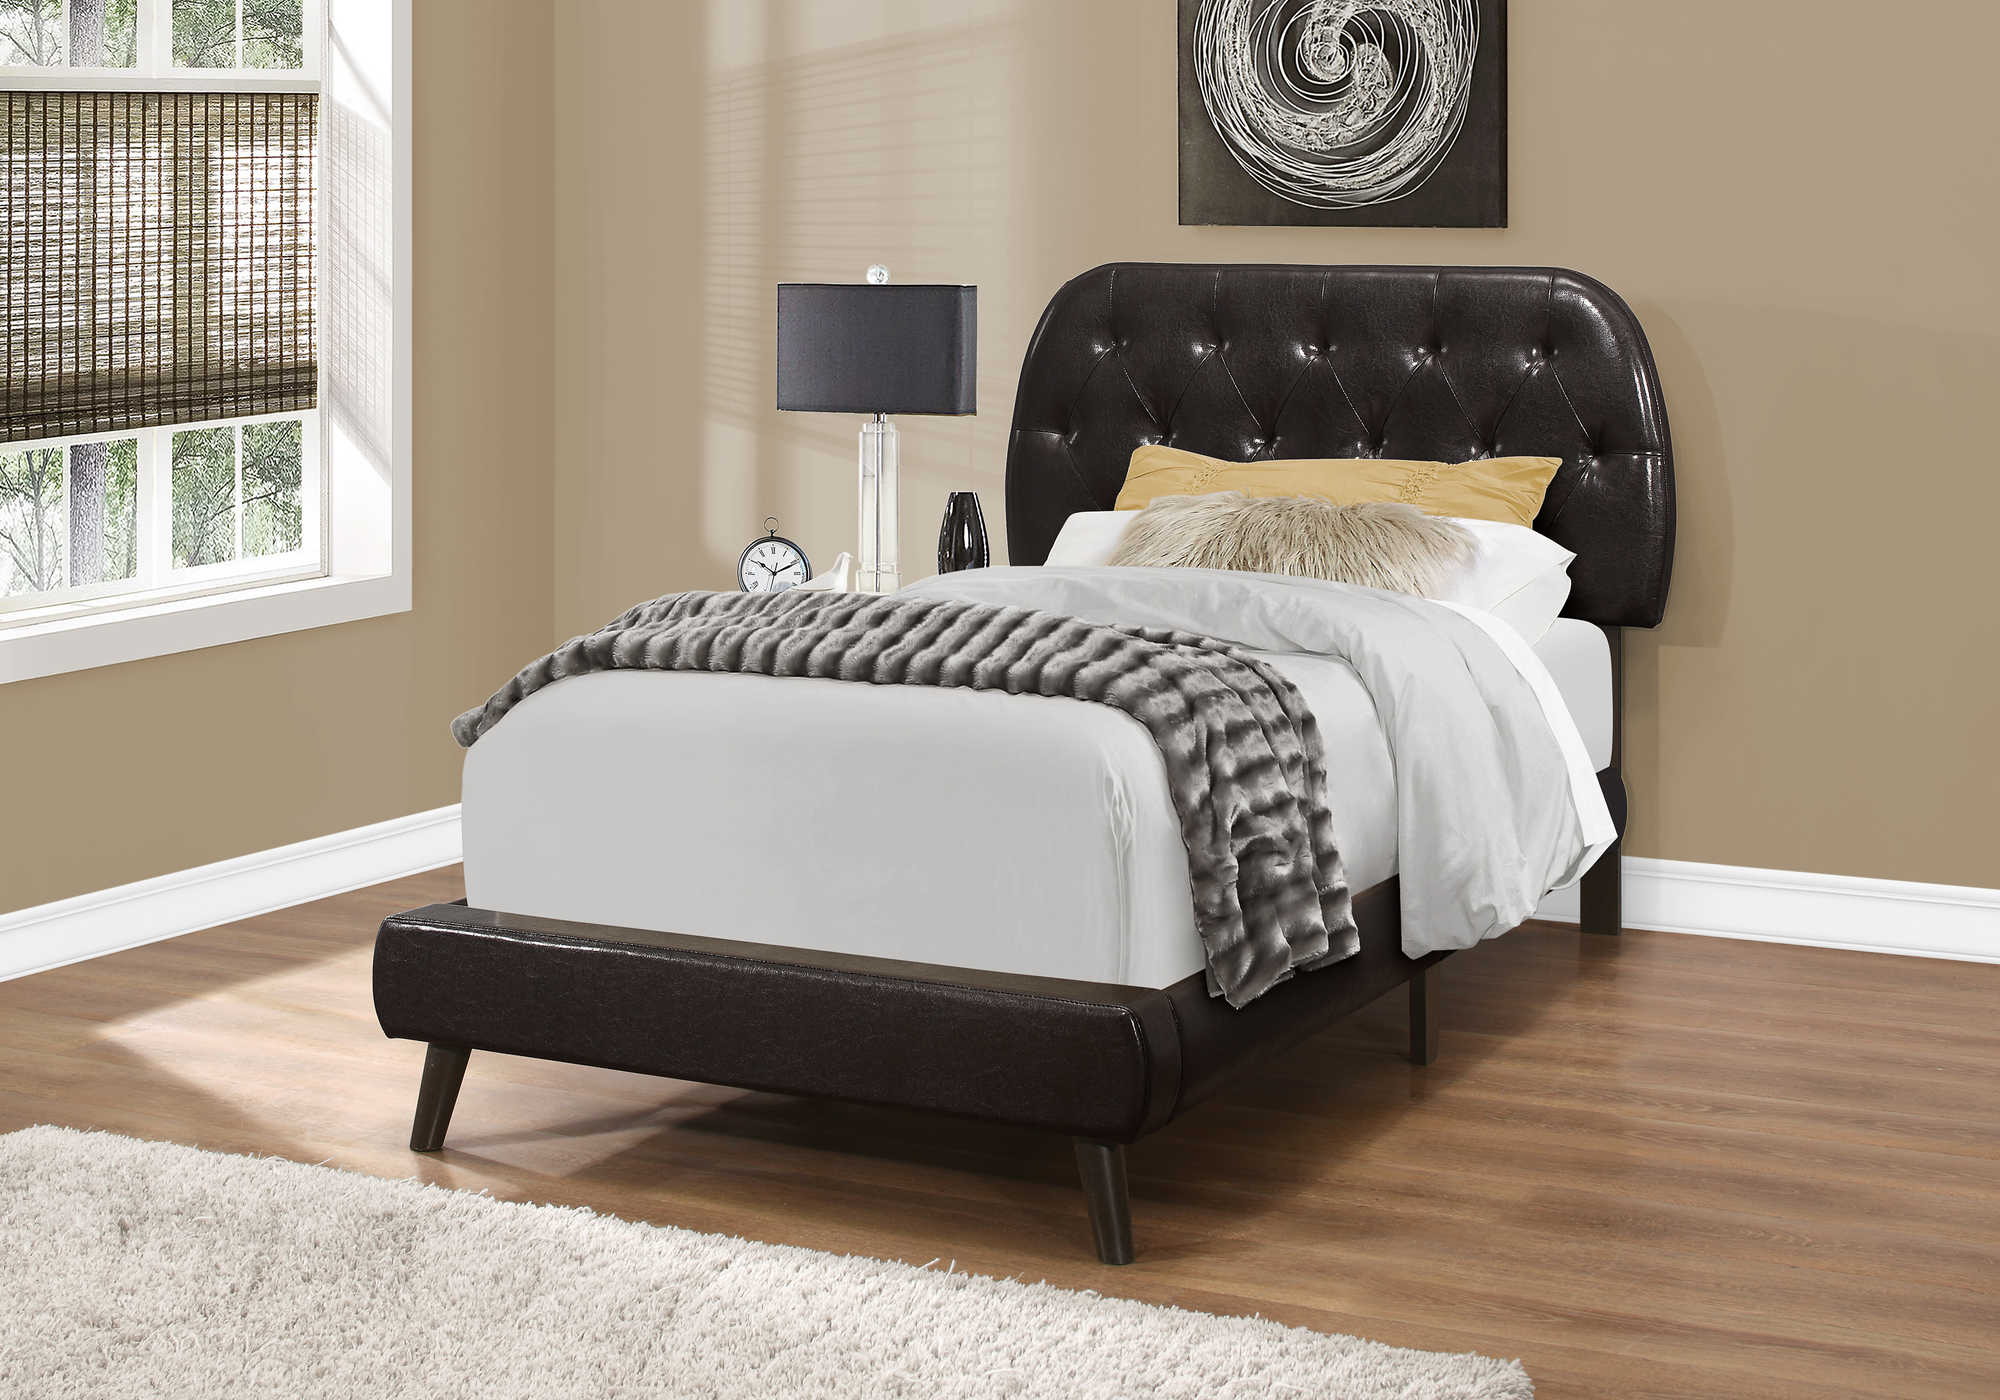 BED - TWIN SIZE / BROWN LEATHER-LOOK WITH WOOD LEGS